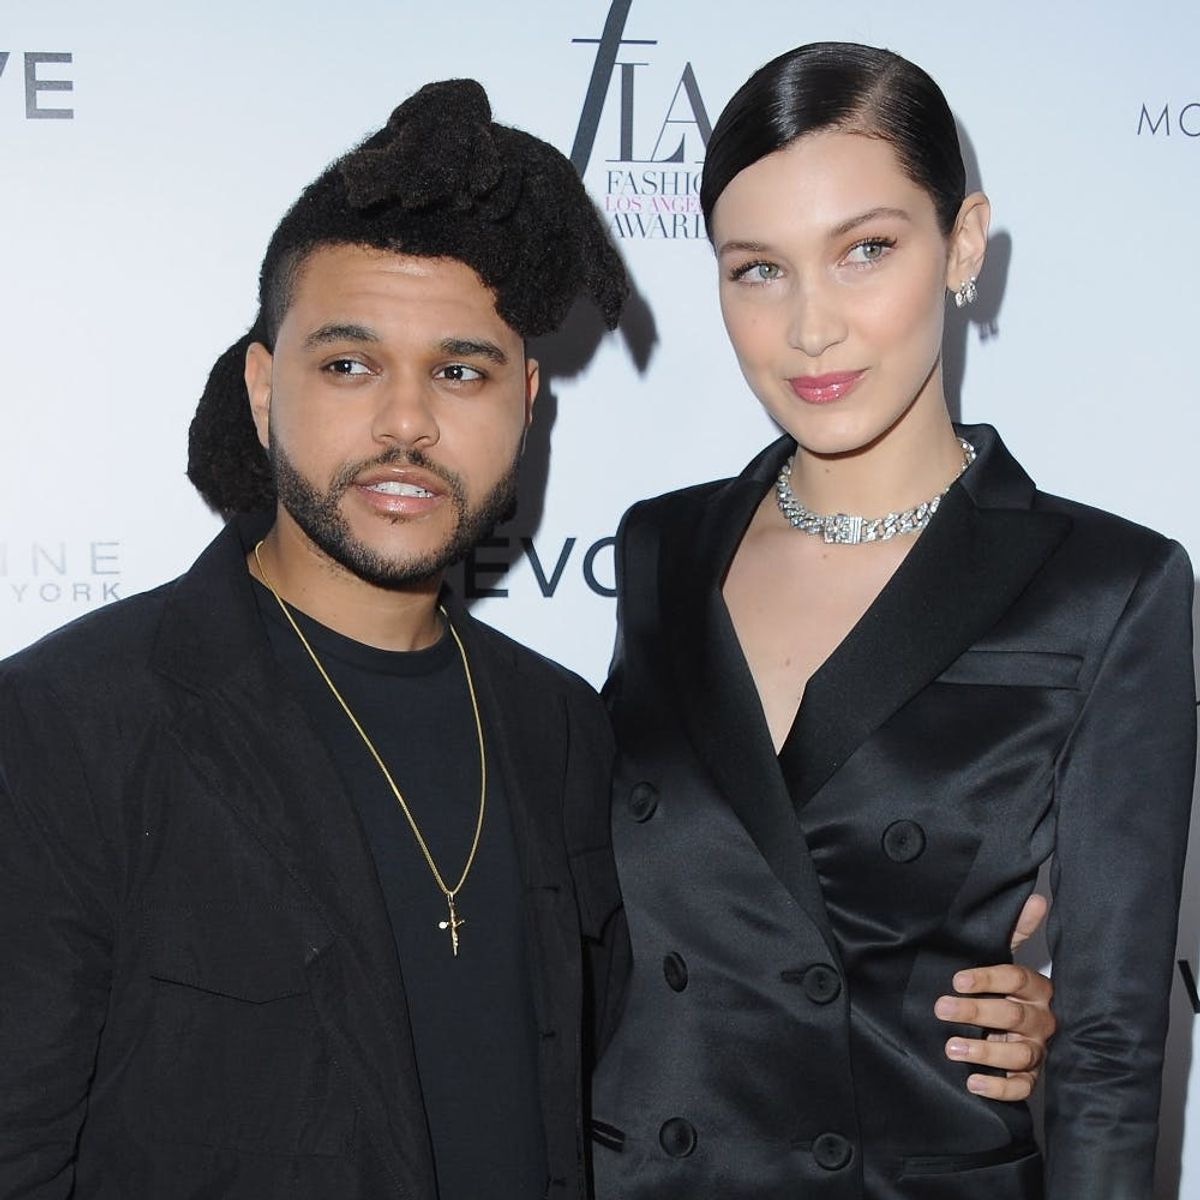 Bella Hadid May Have Moved on from The Weeknd and This Pic Proves It